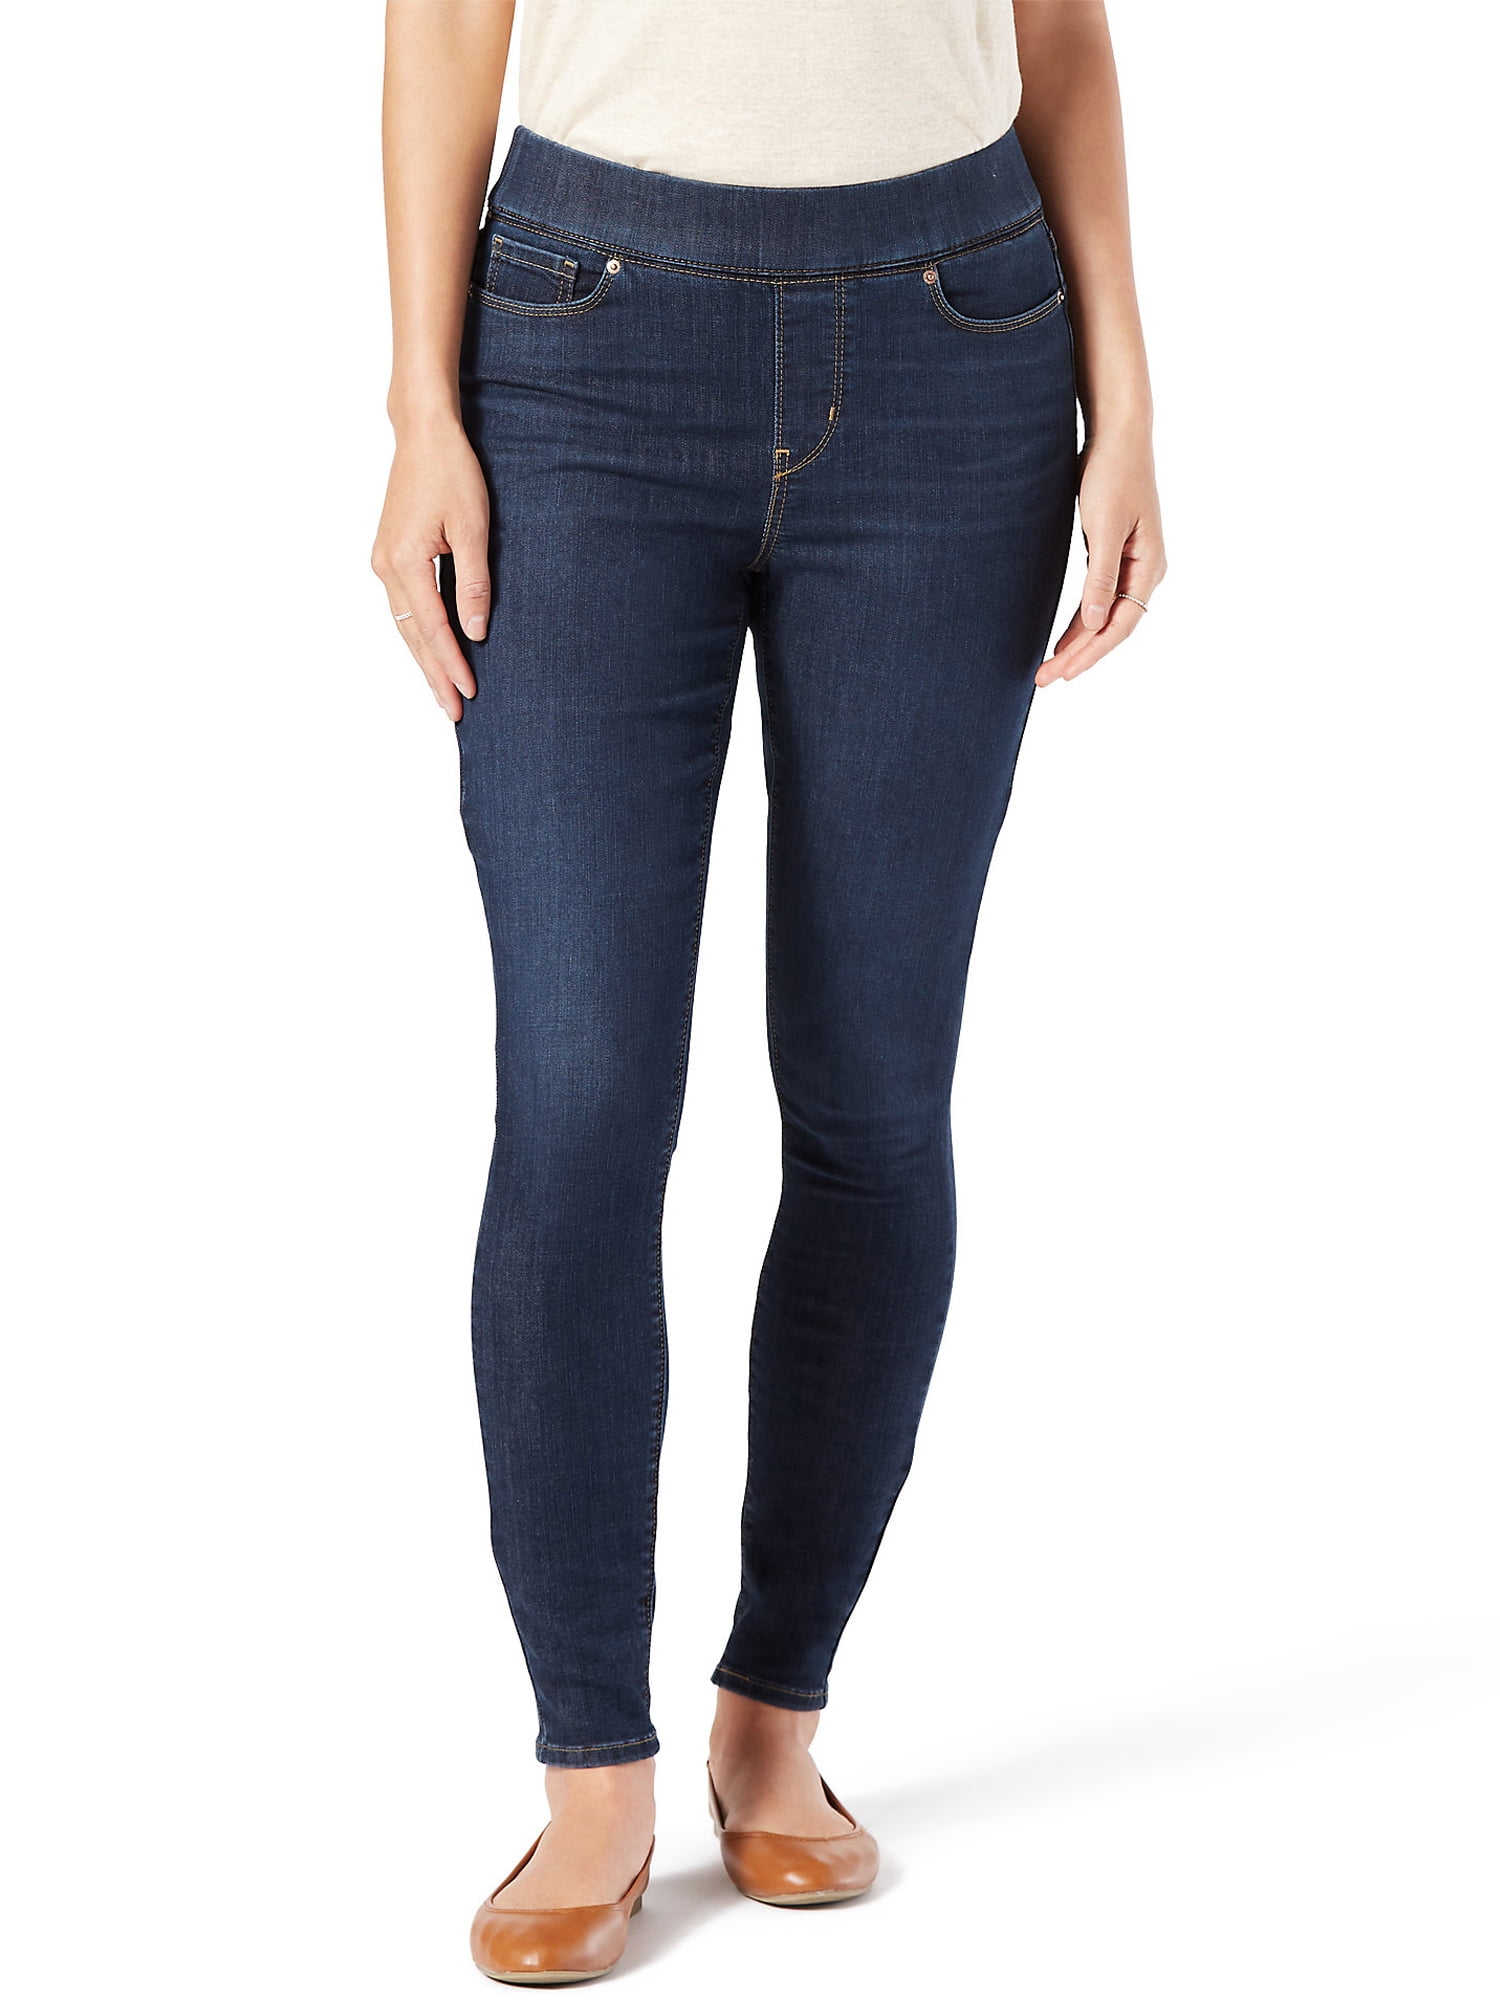 by Levi Strauss & Co. Women's Simply Shaping Pull-On Super Jeans - Walmart.com